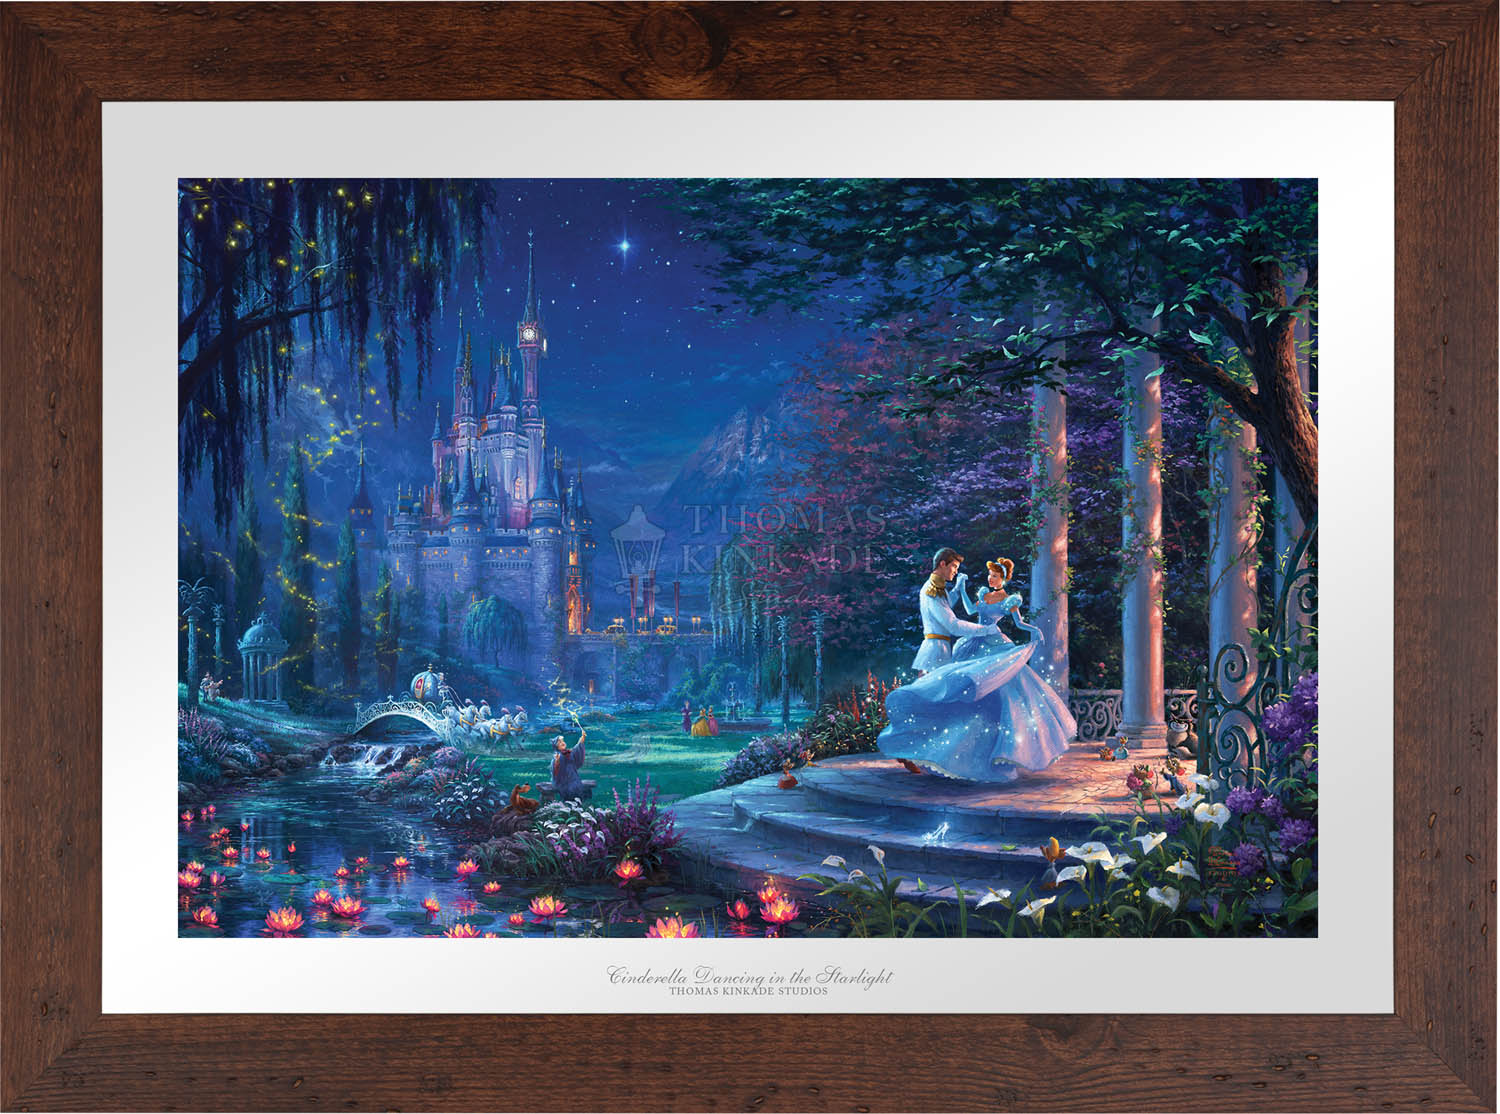 Cinderella's dreams have come true under the starlight Cinderella is in the arms of her prince - Wildwood Frame